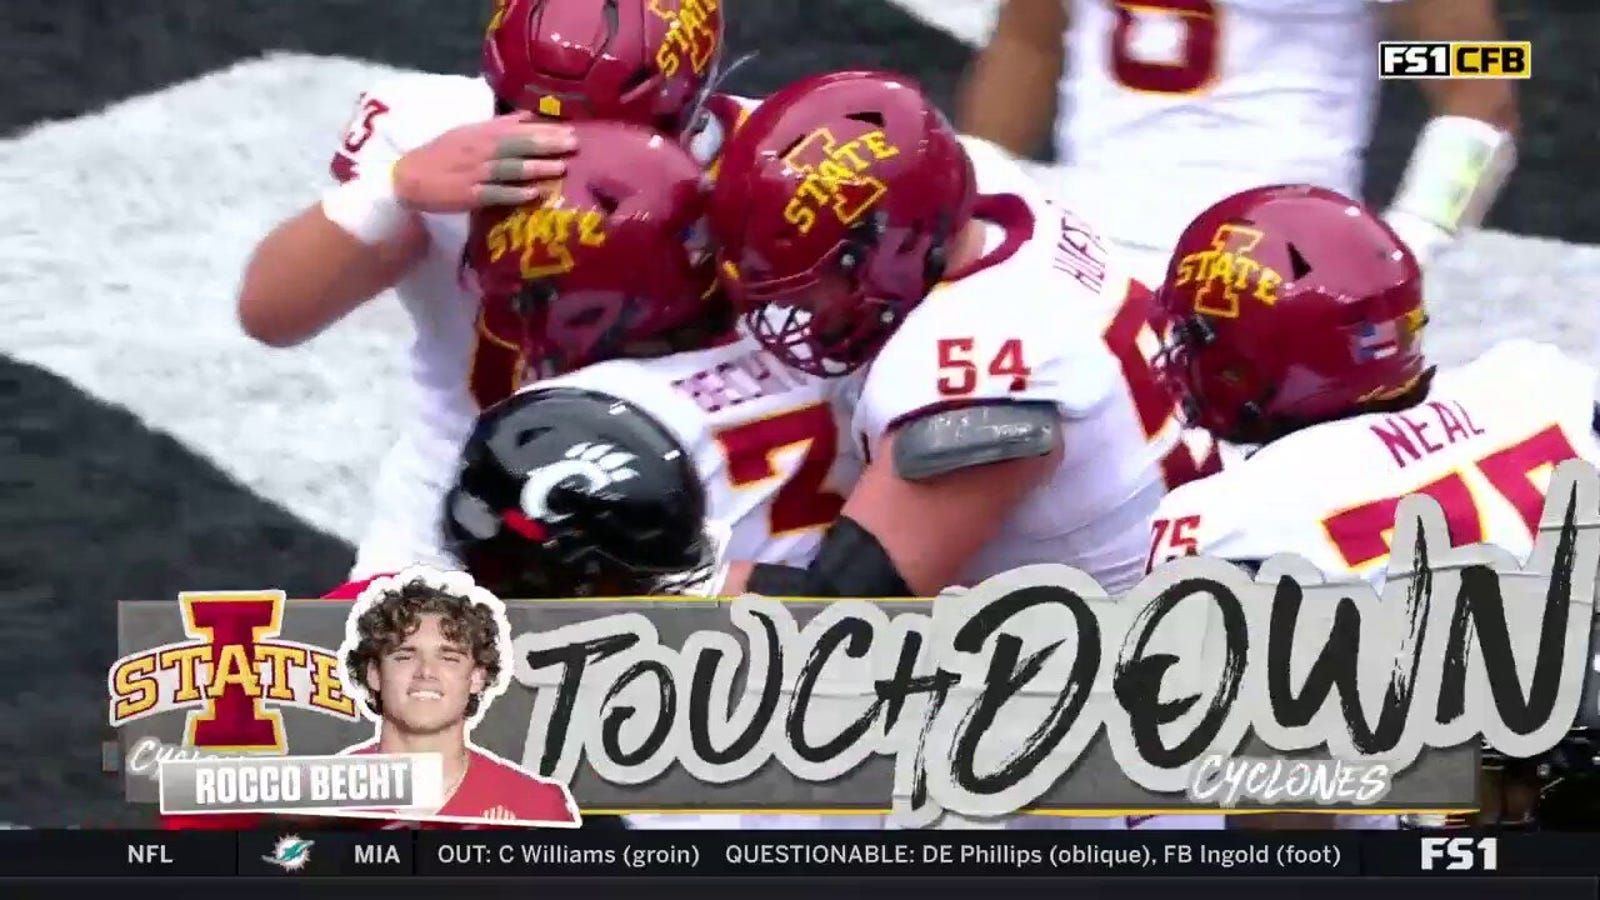 Iowa State QB Rocco Becht takes it to the house for an Iowa State TD